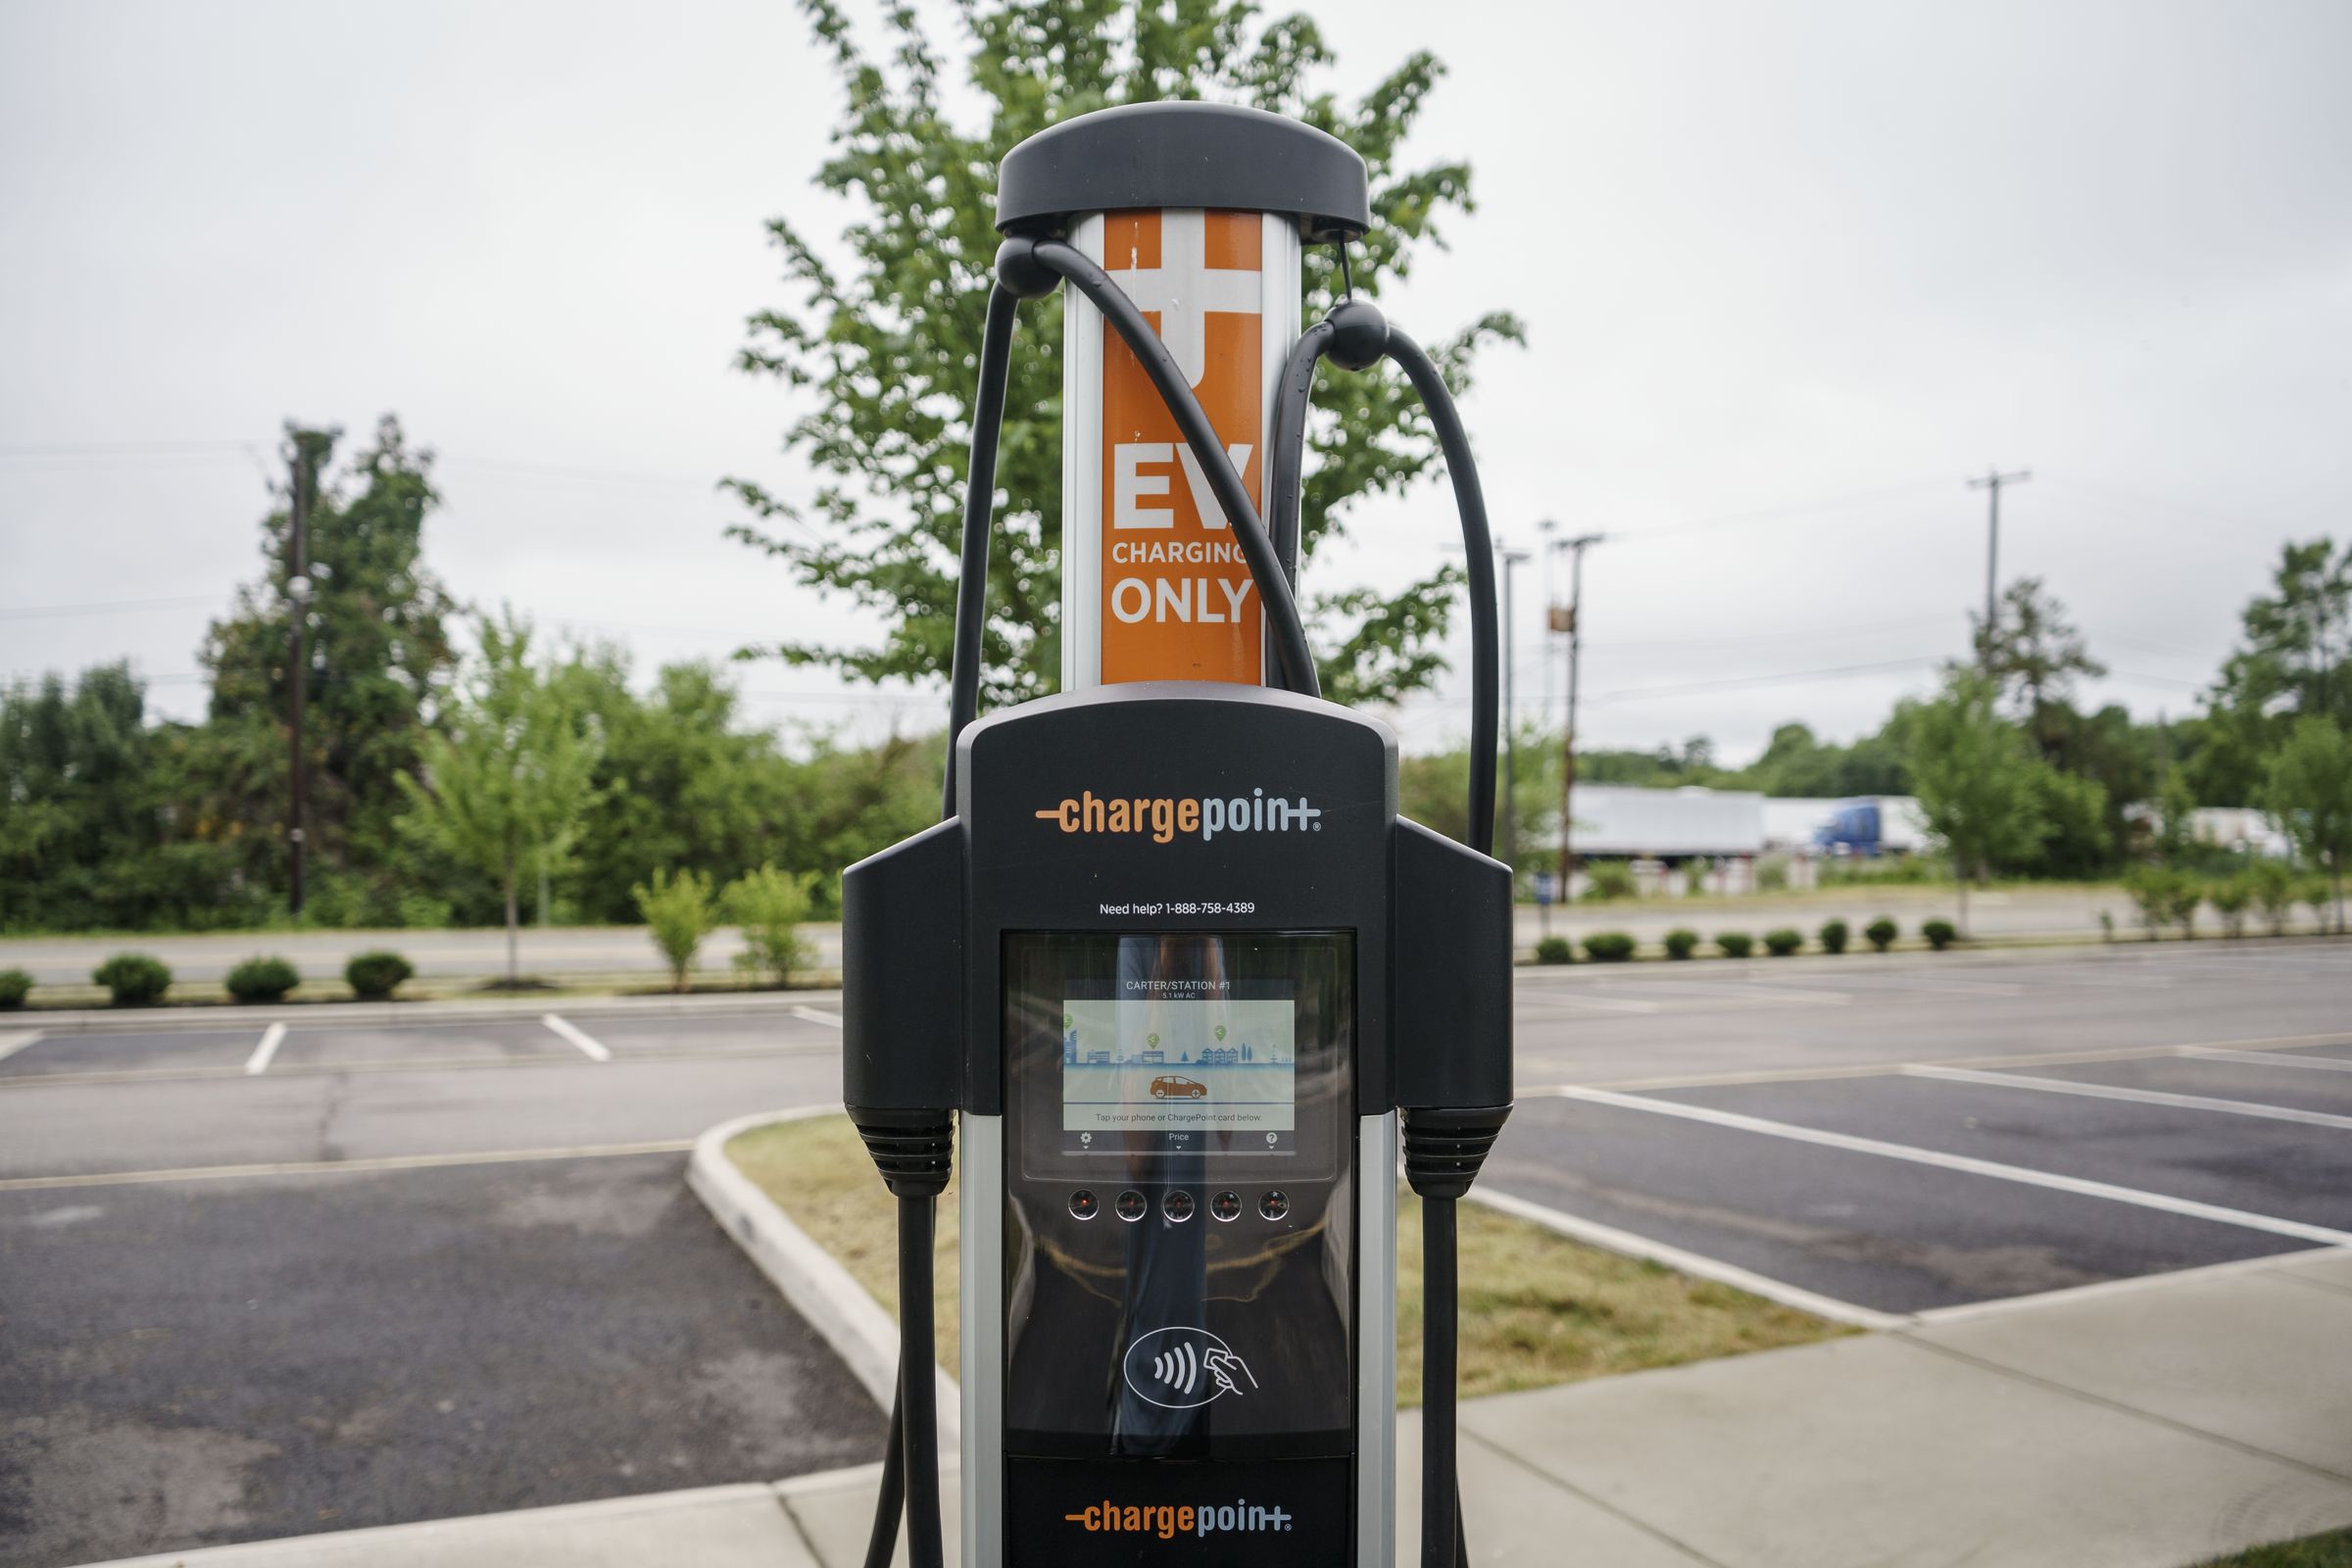 A chargepoint charger stationed in the middle of a car park.